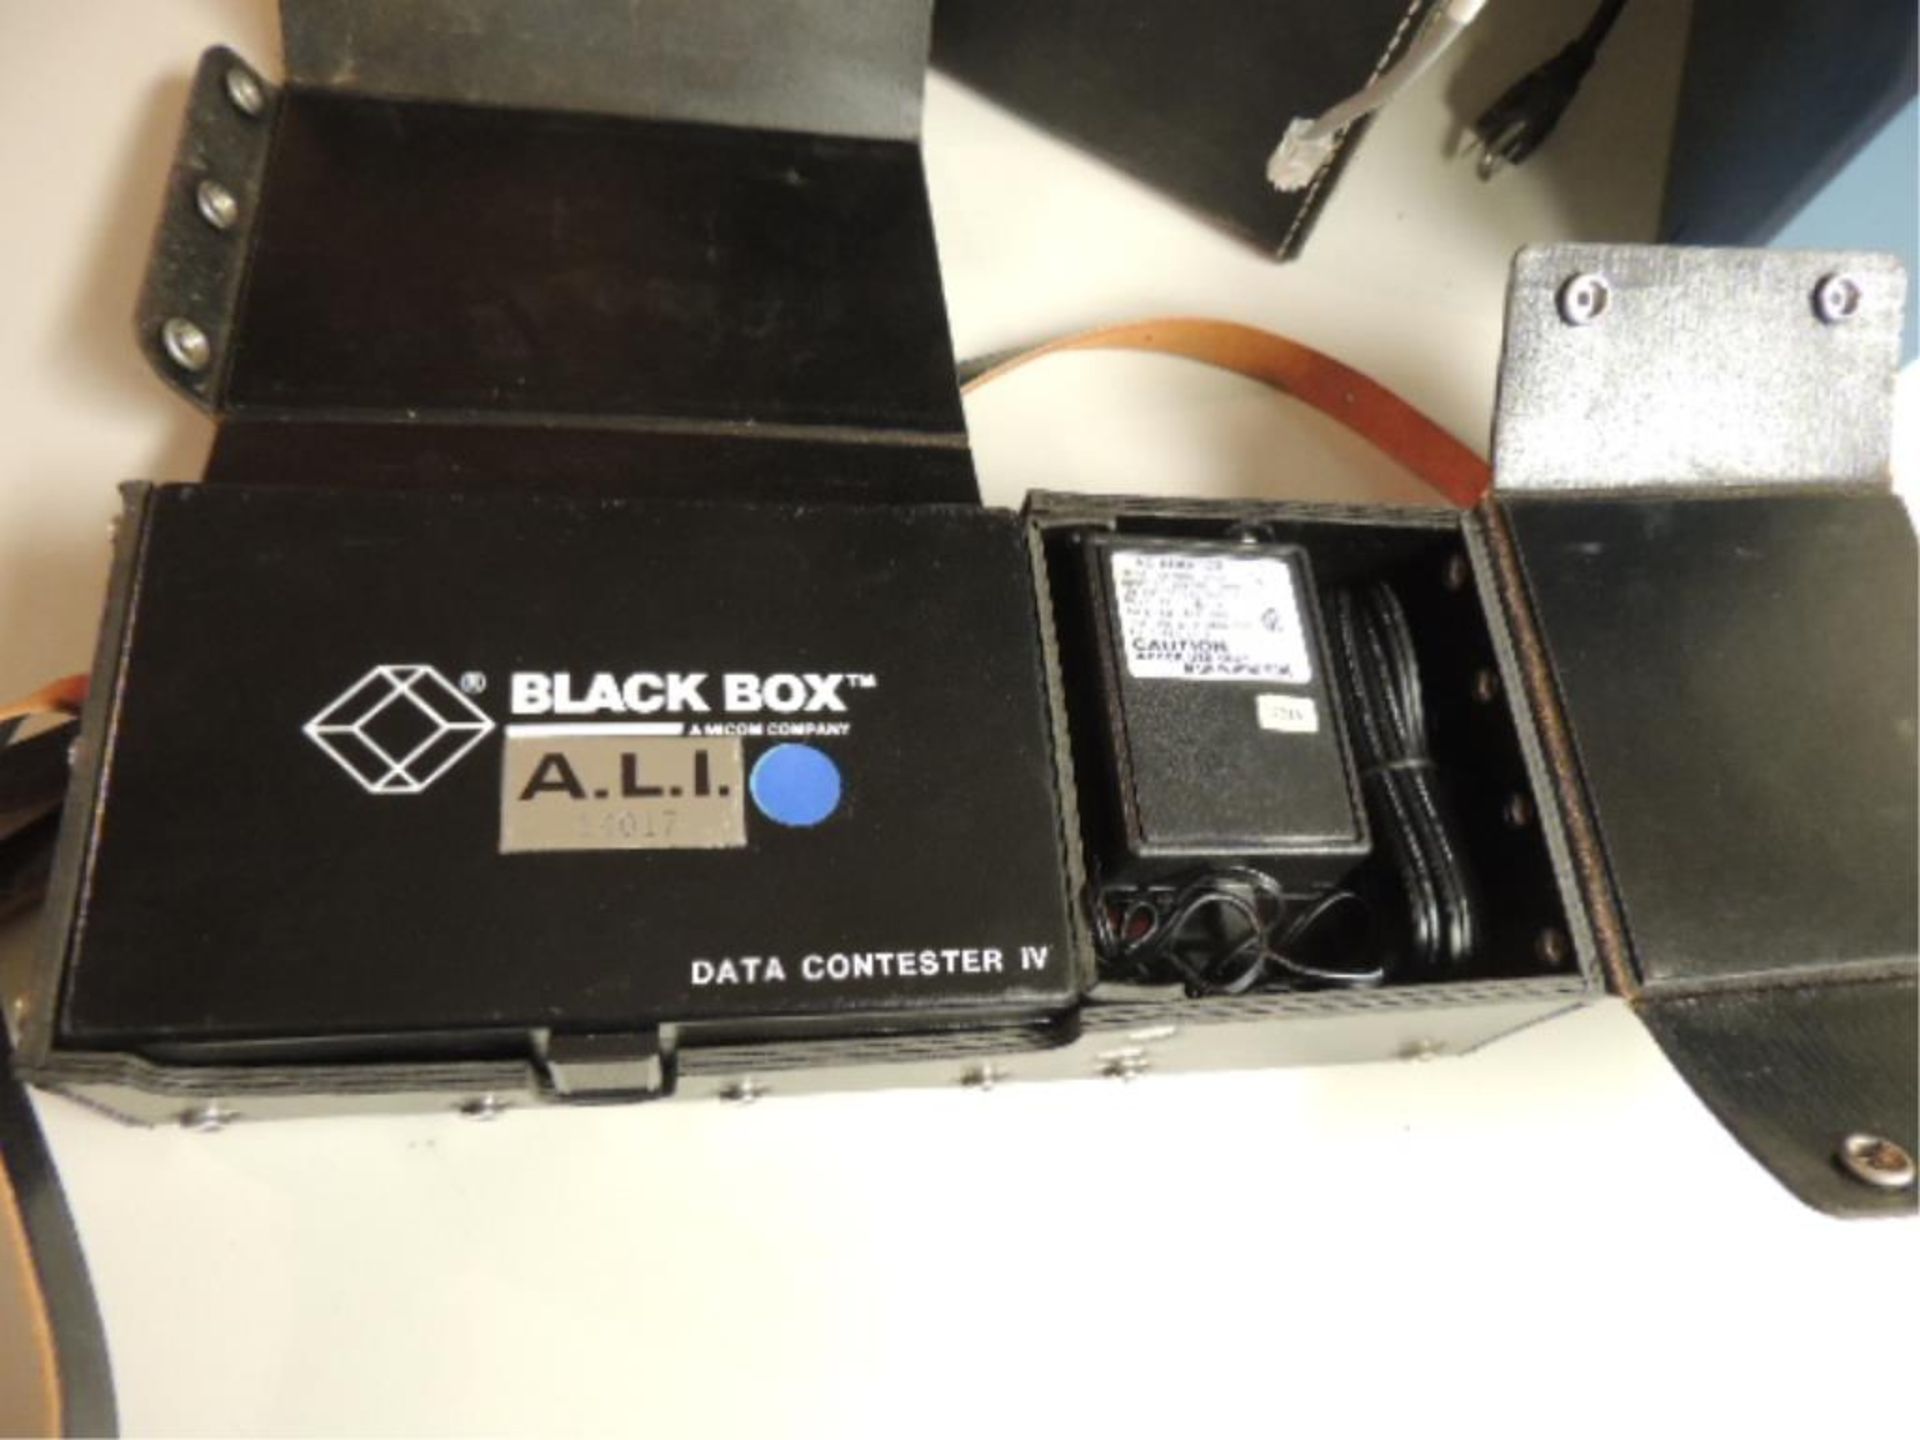 Micon DT 025 Tester; Black box data contester IV. HIT# 2192402. Loc: 901 cage. Asset Located at 64